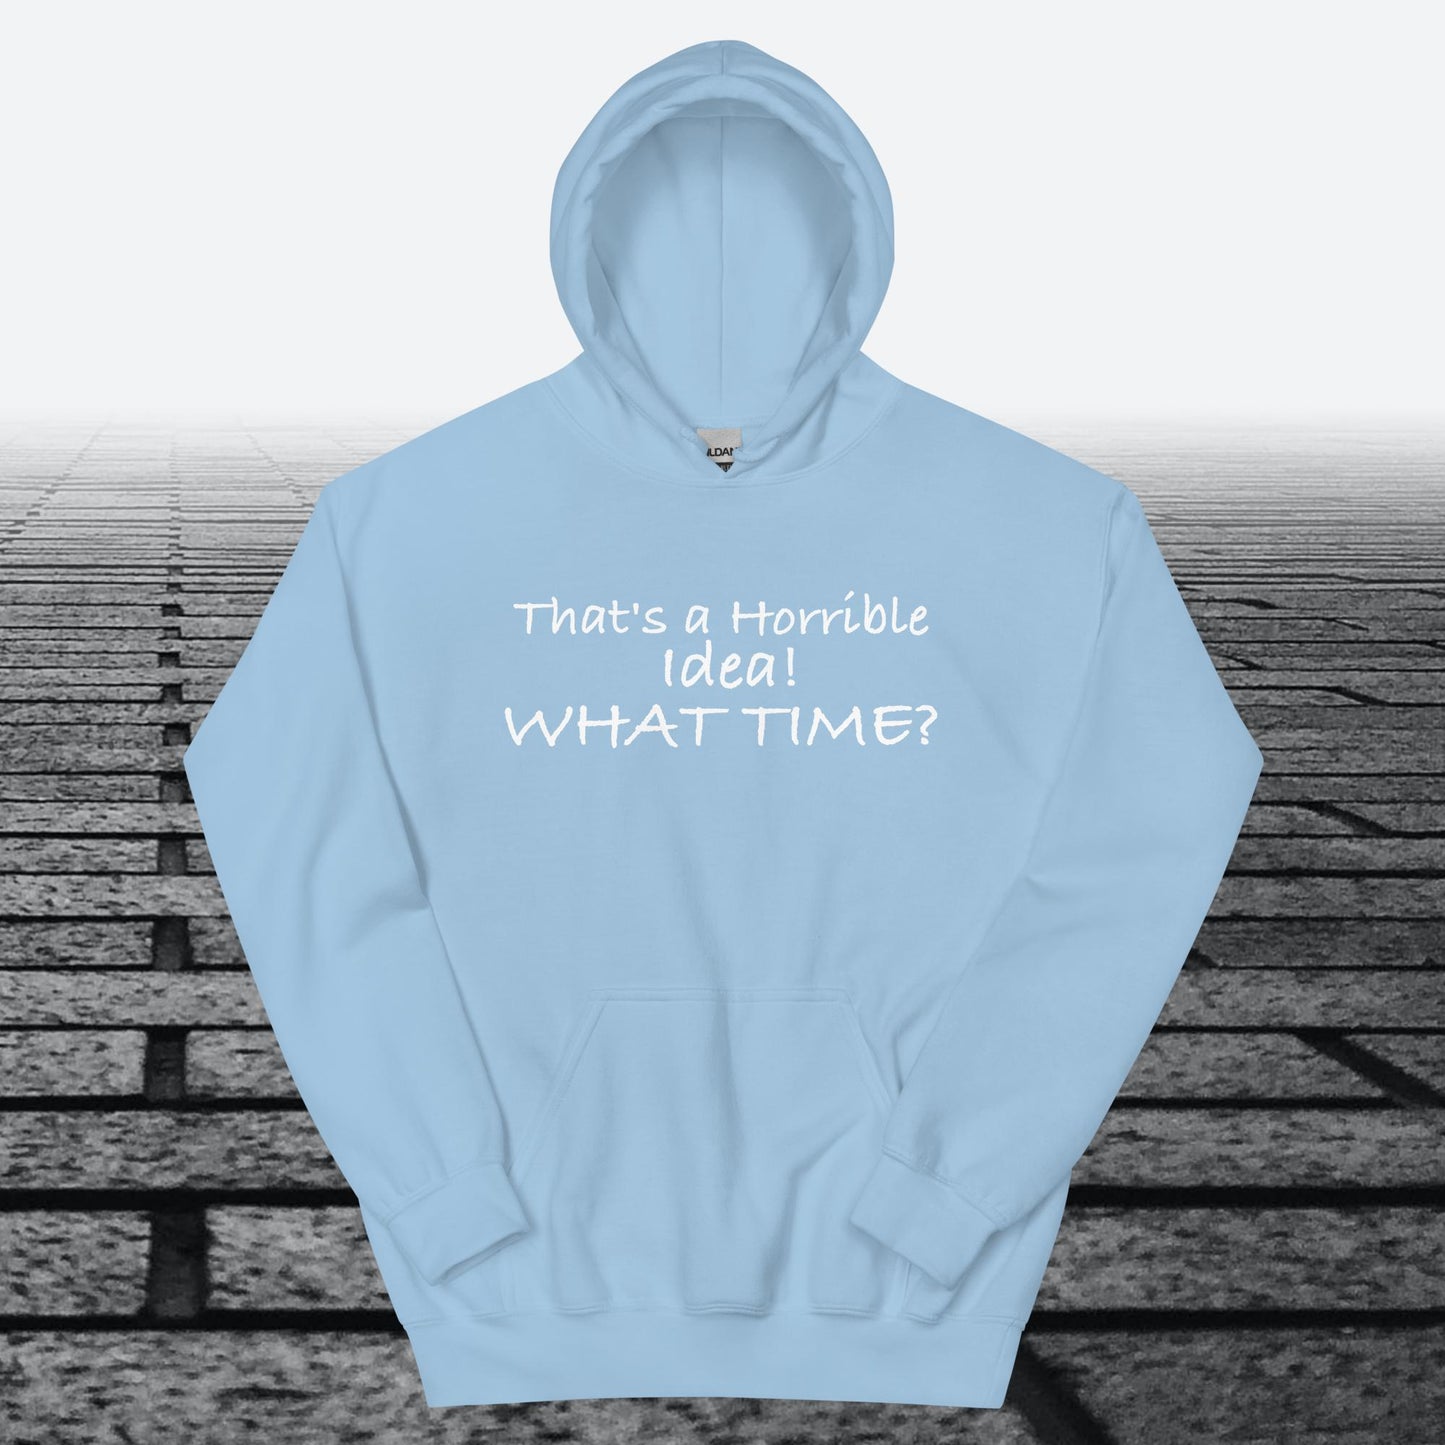 That's a Horrible Idea! What Time?, Hoodie Sweatshirt